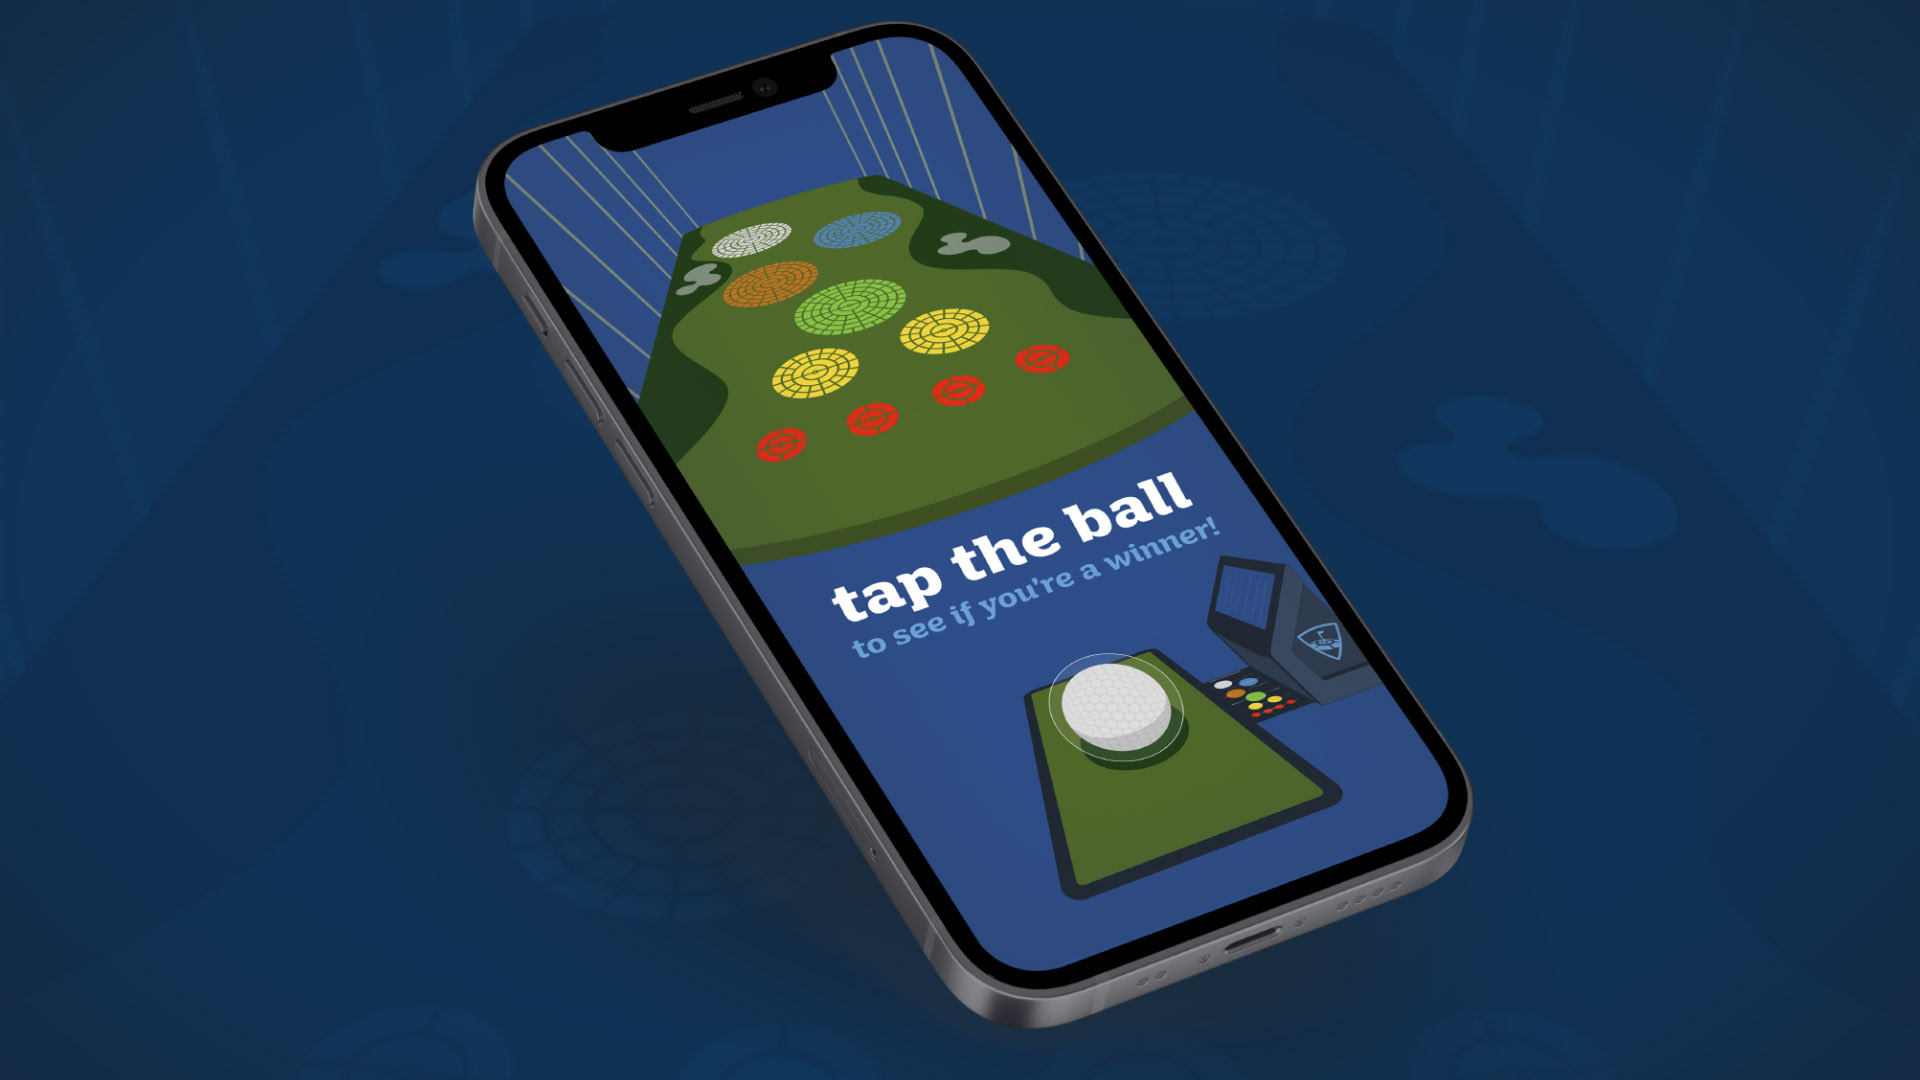 Screenshot of Tap the Ball to See if You Are a Winner in the Topgolf App